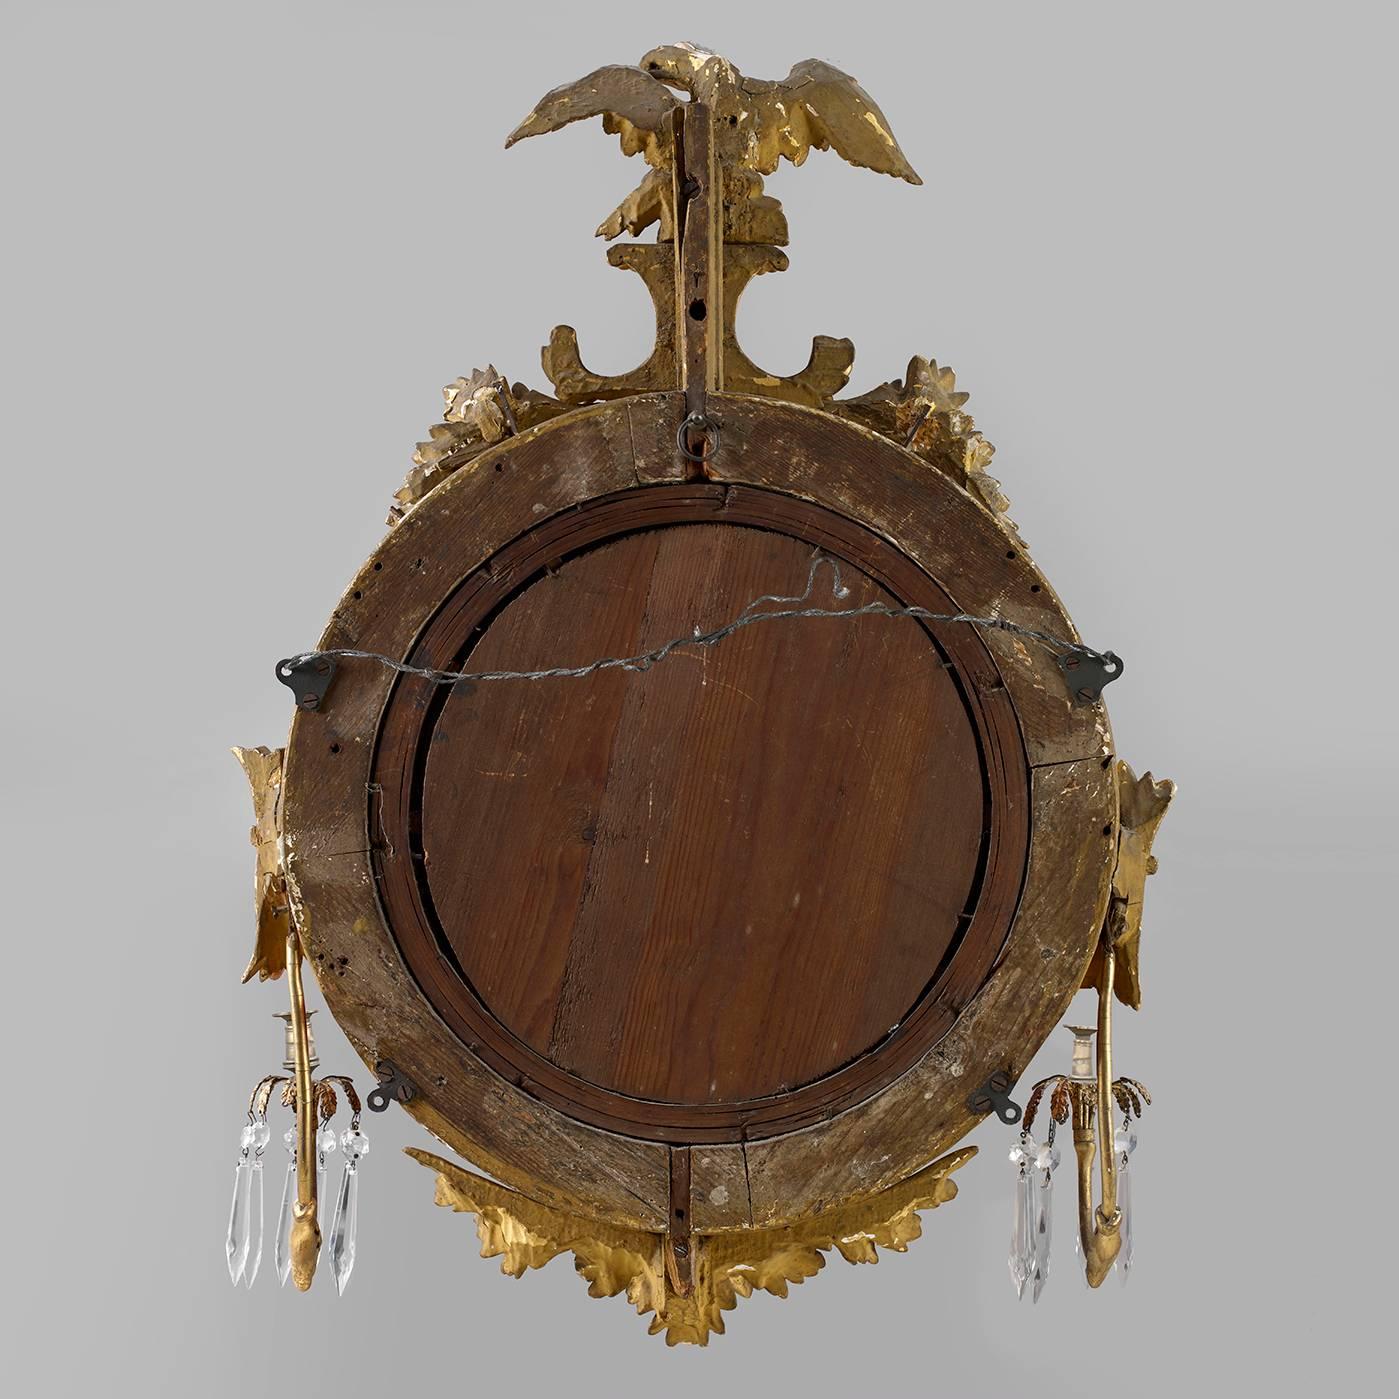 English or American, circa 1800-1820.
Carved giltwood and gesso, looking glass, brass sockets and glass prism.
The convex mirror is surmounted by a carved eagle with outstretched wings perched on a plinth above a circular molded frame with balls